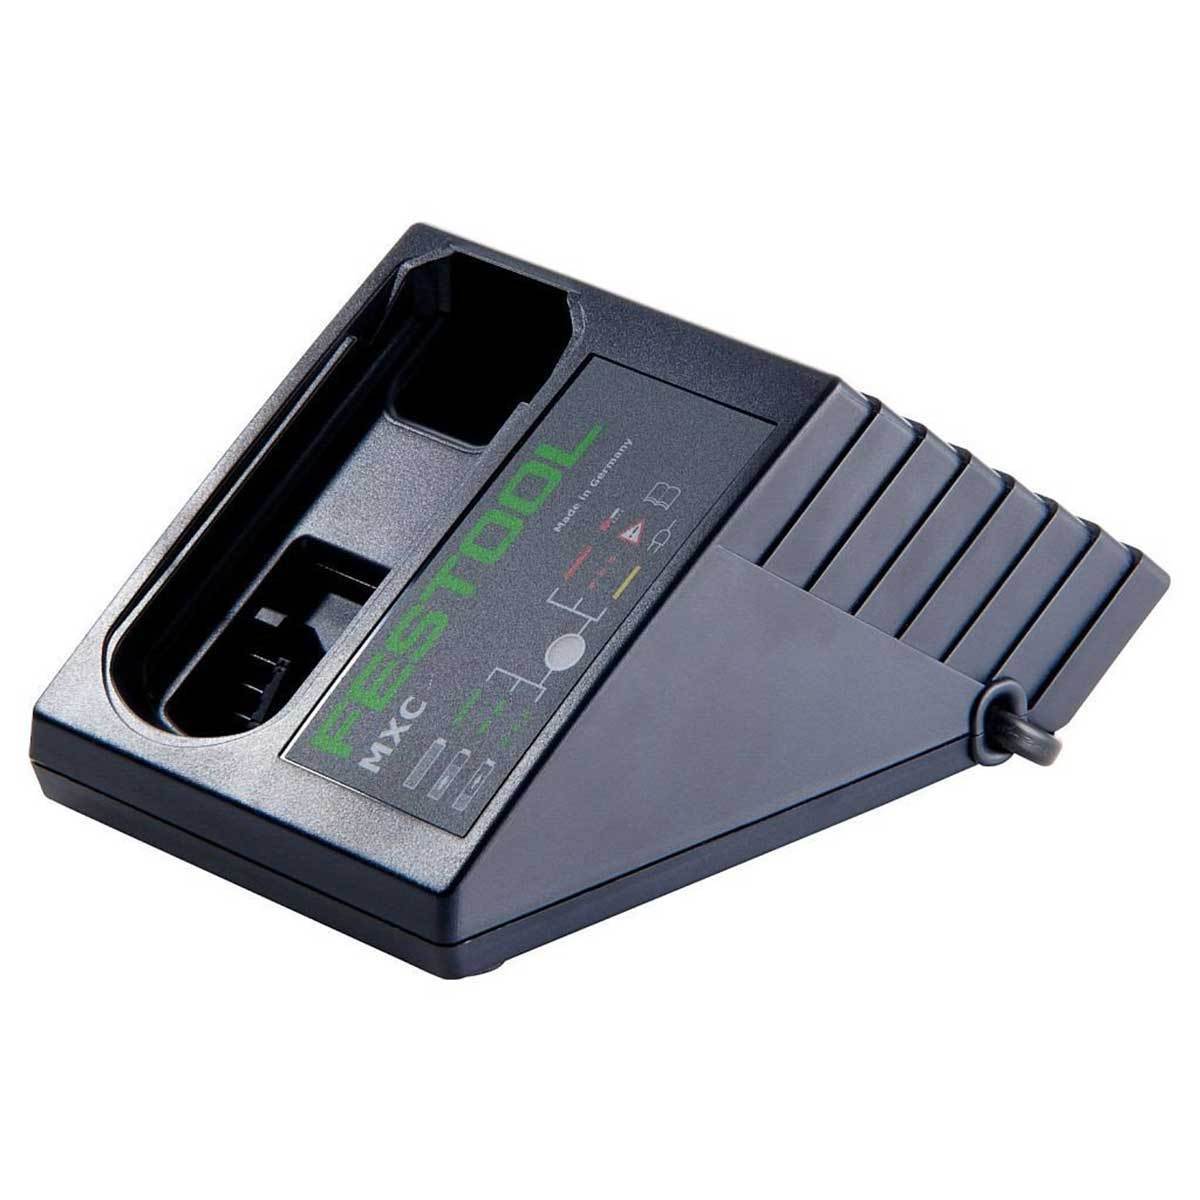 Festool MXC battery charger for CXS and TXS drill batteries with indicator light.